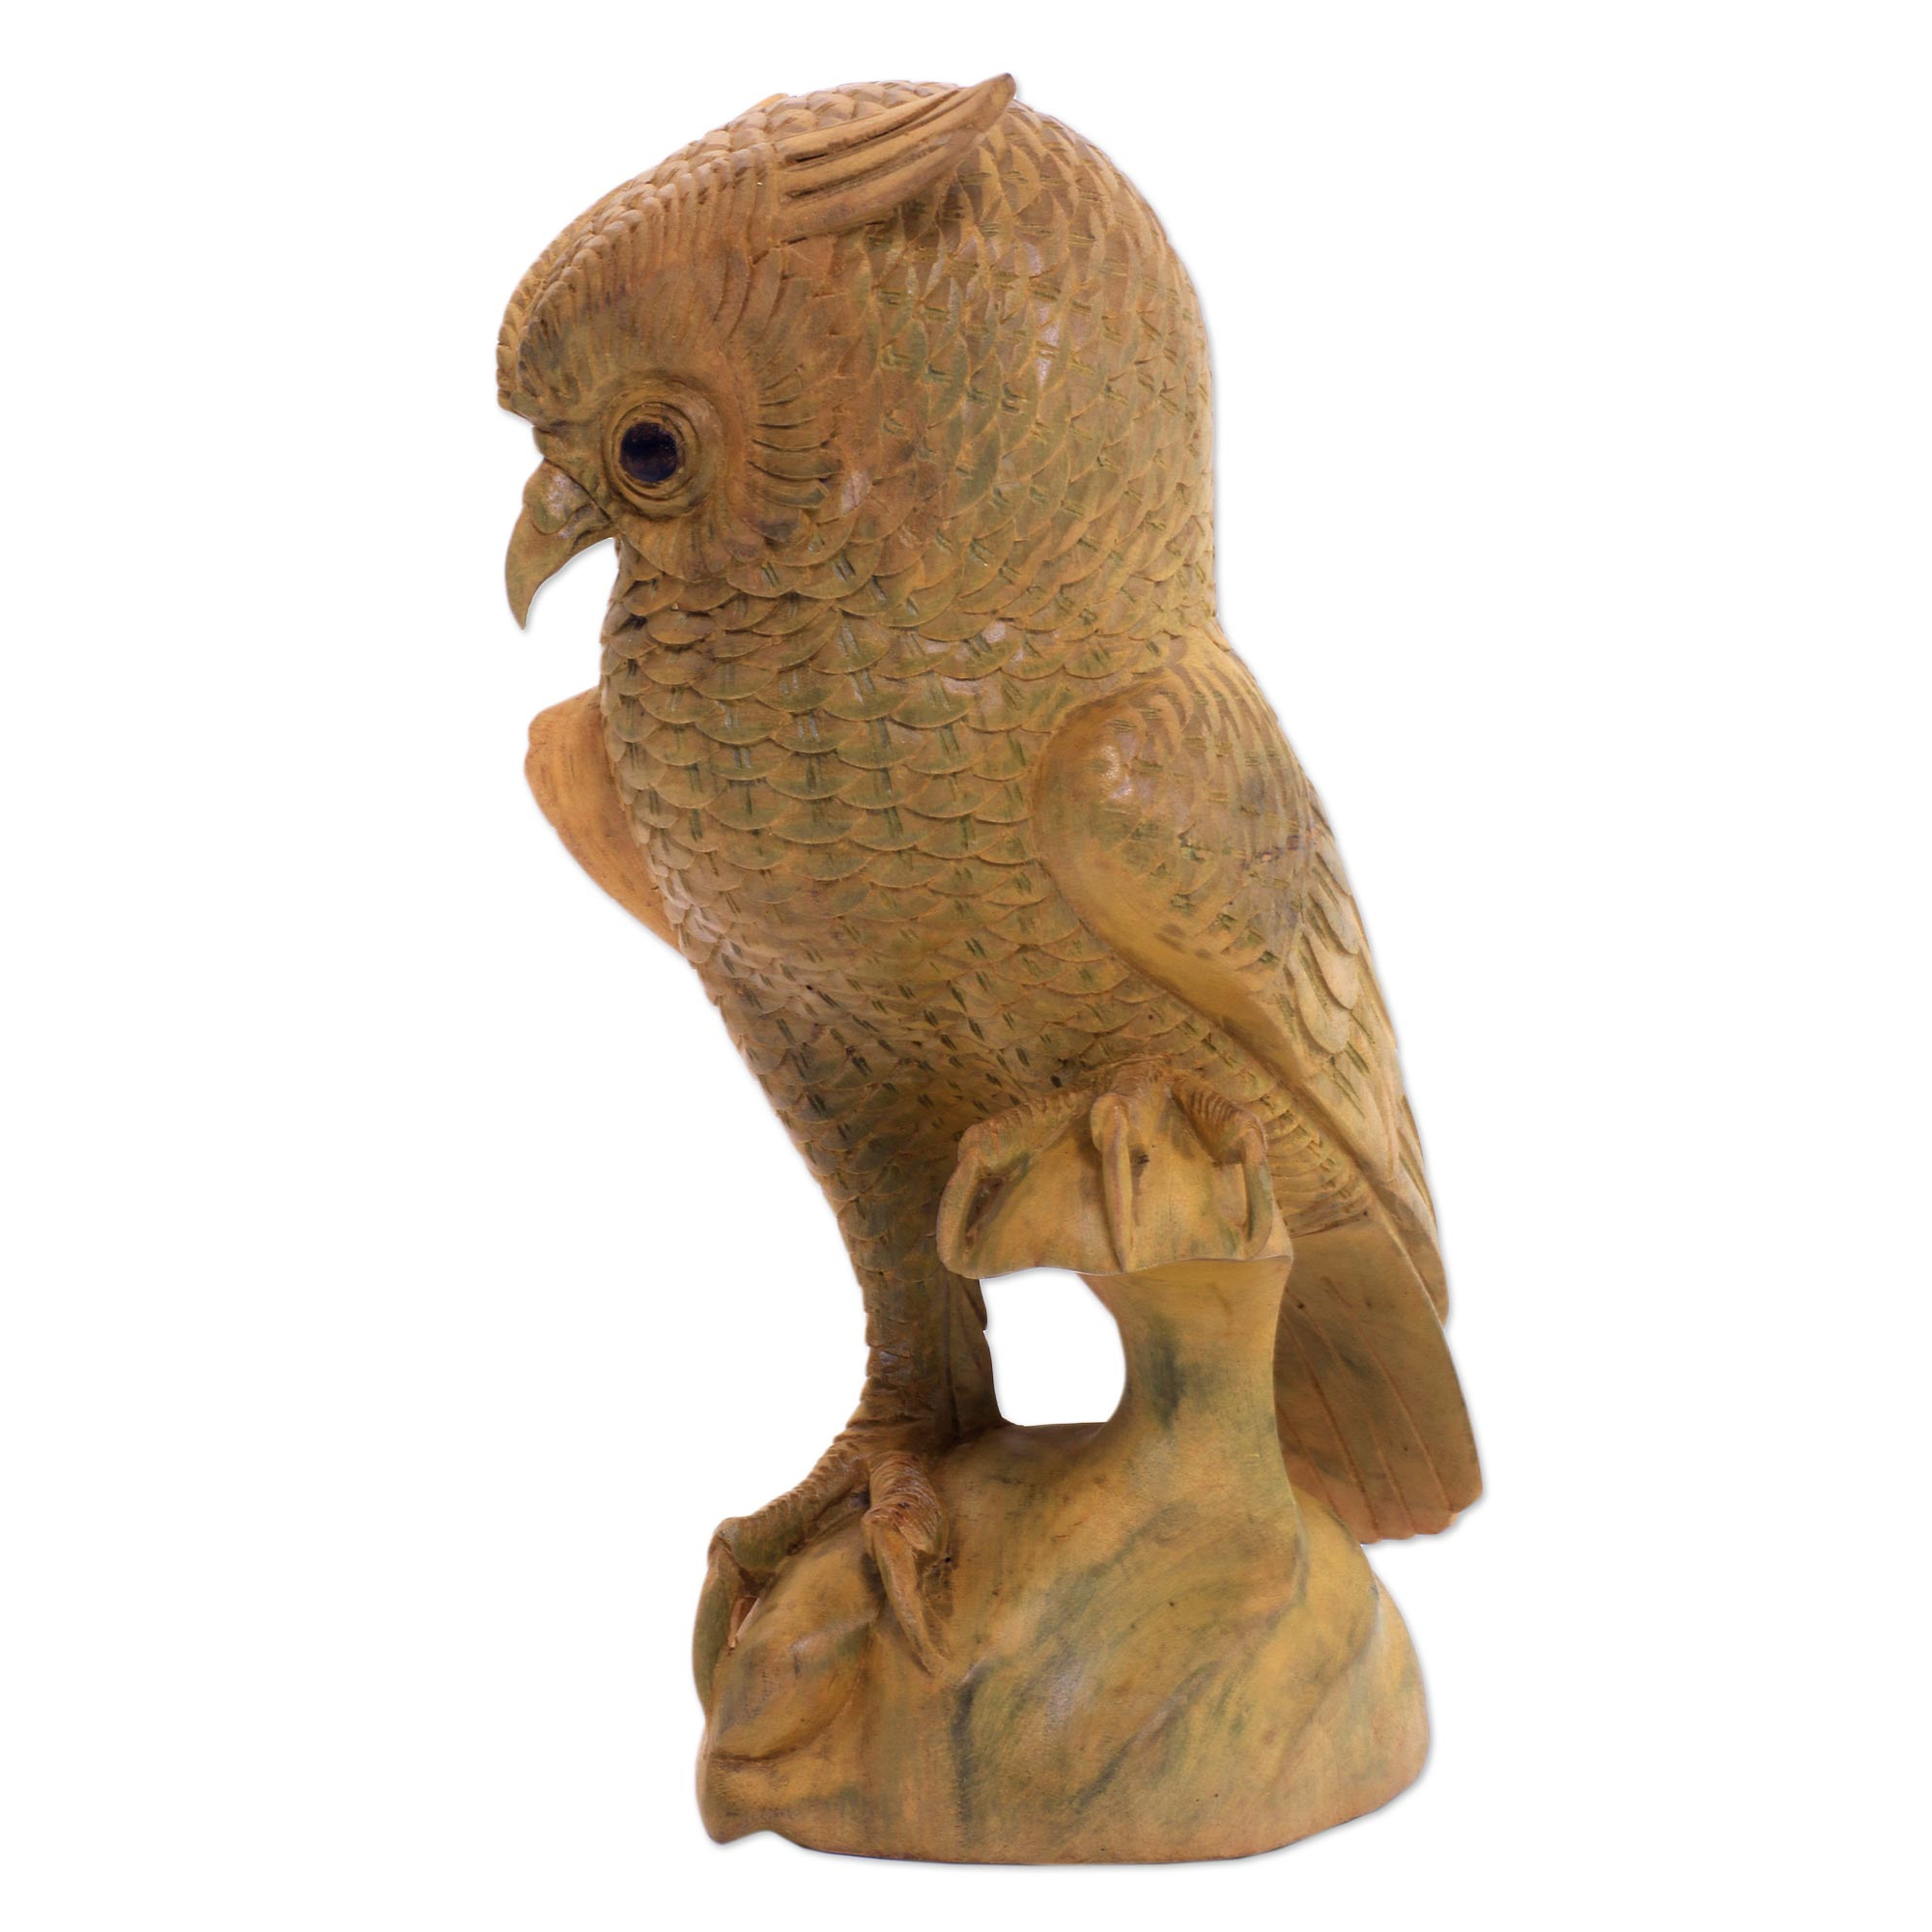 Hand-Carved Wood Owl Sculpture from Bali - Bird of Prey | NOVICA